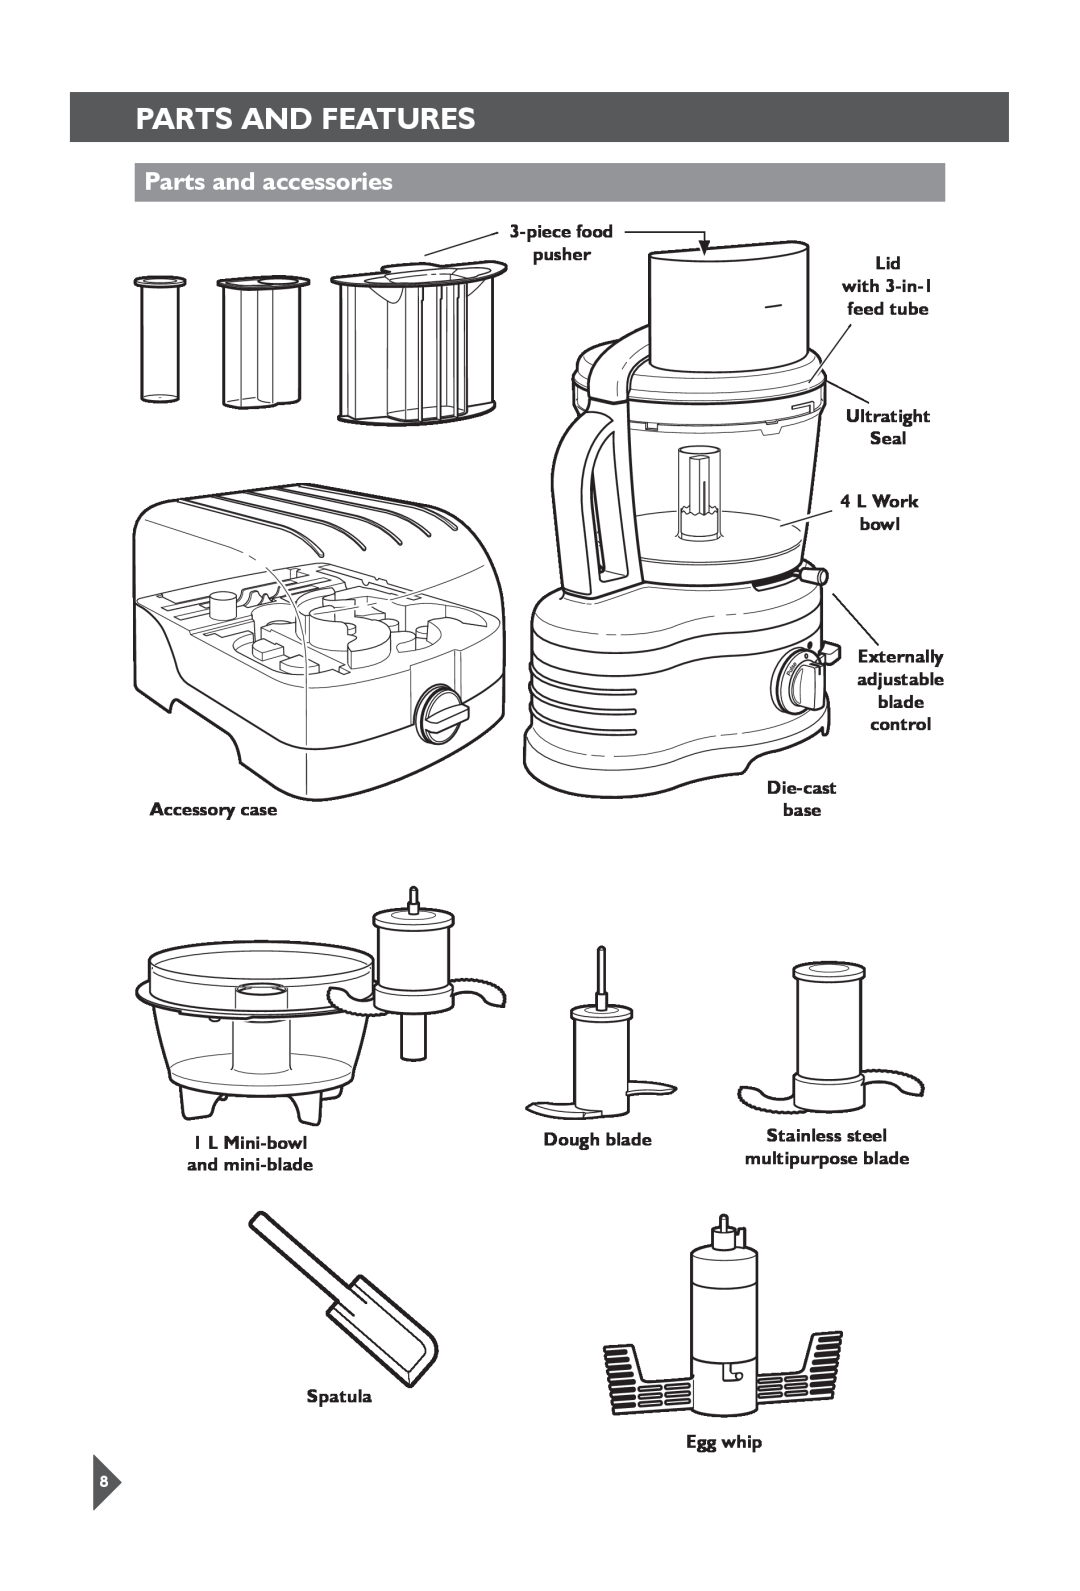 KitchenAid 5KFP1644 Parts and Features, Parts and accessories, bowl, Accessory case, Dough blade, Spatula Egg whip, base 